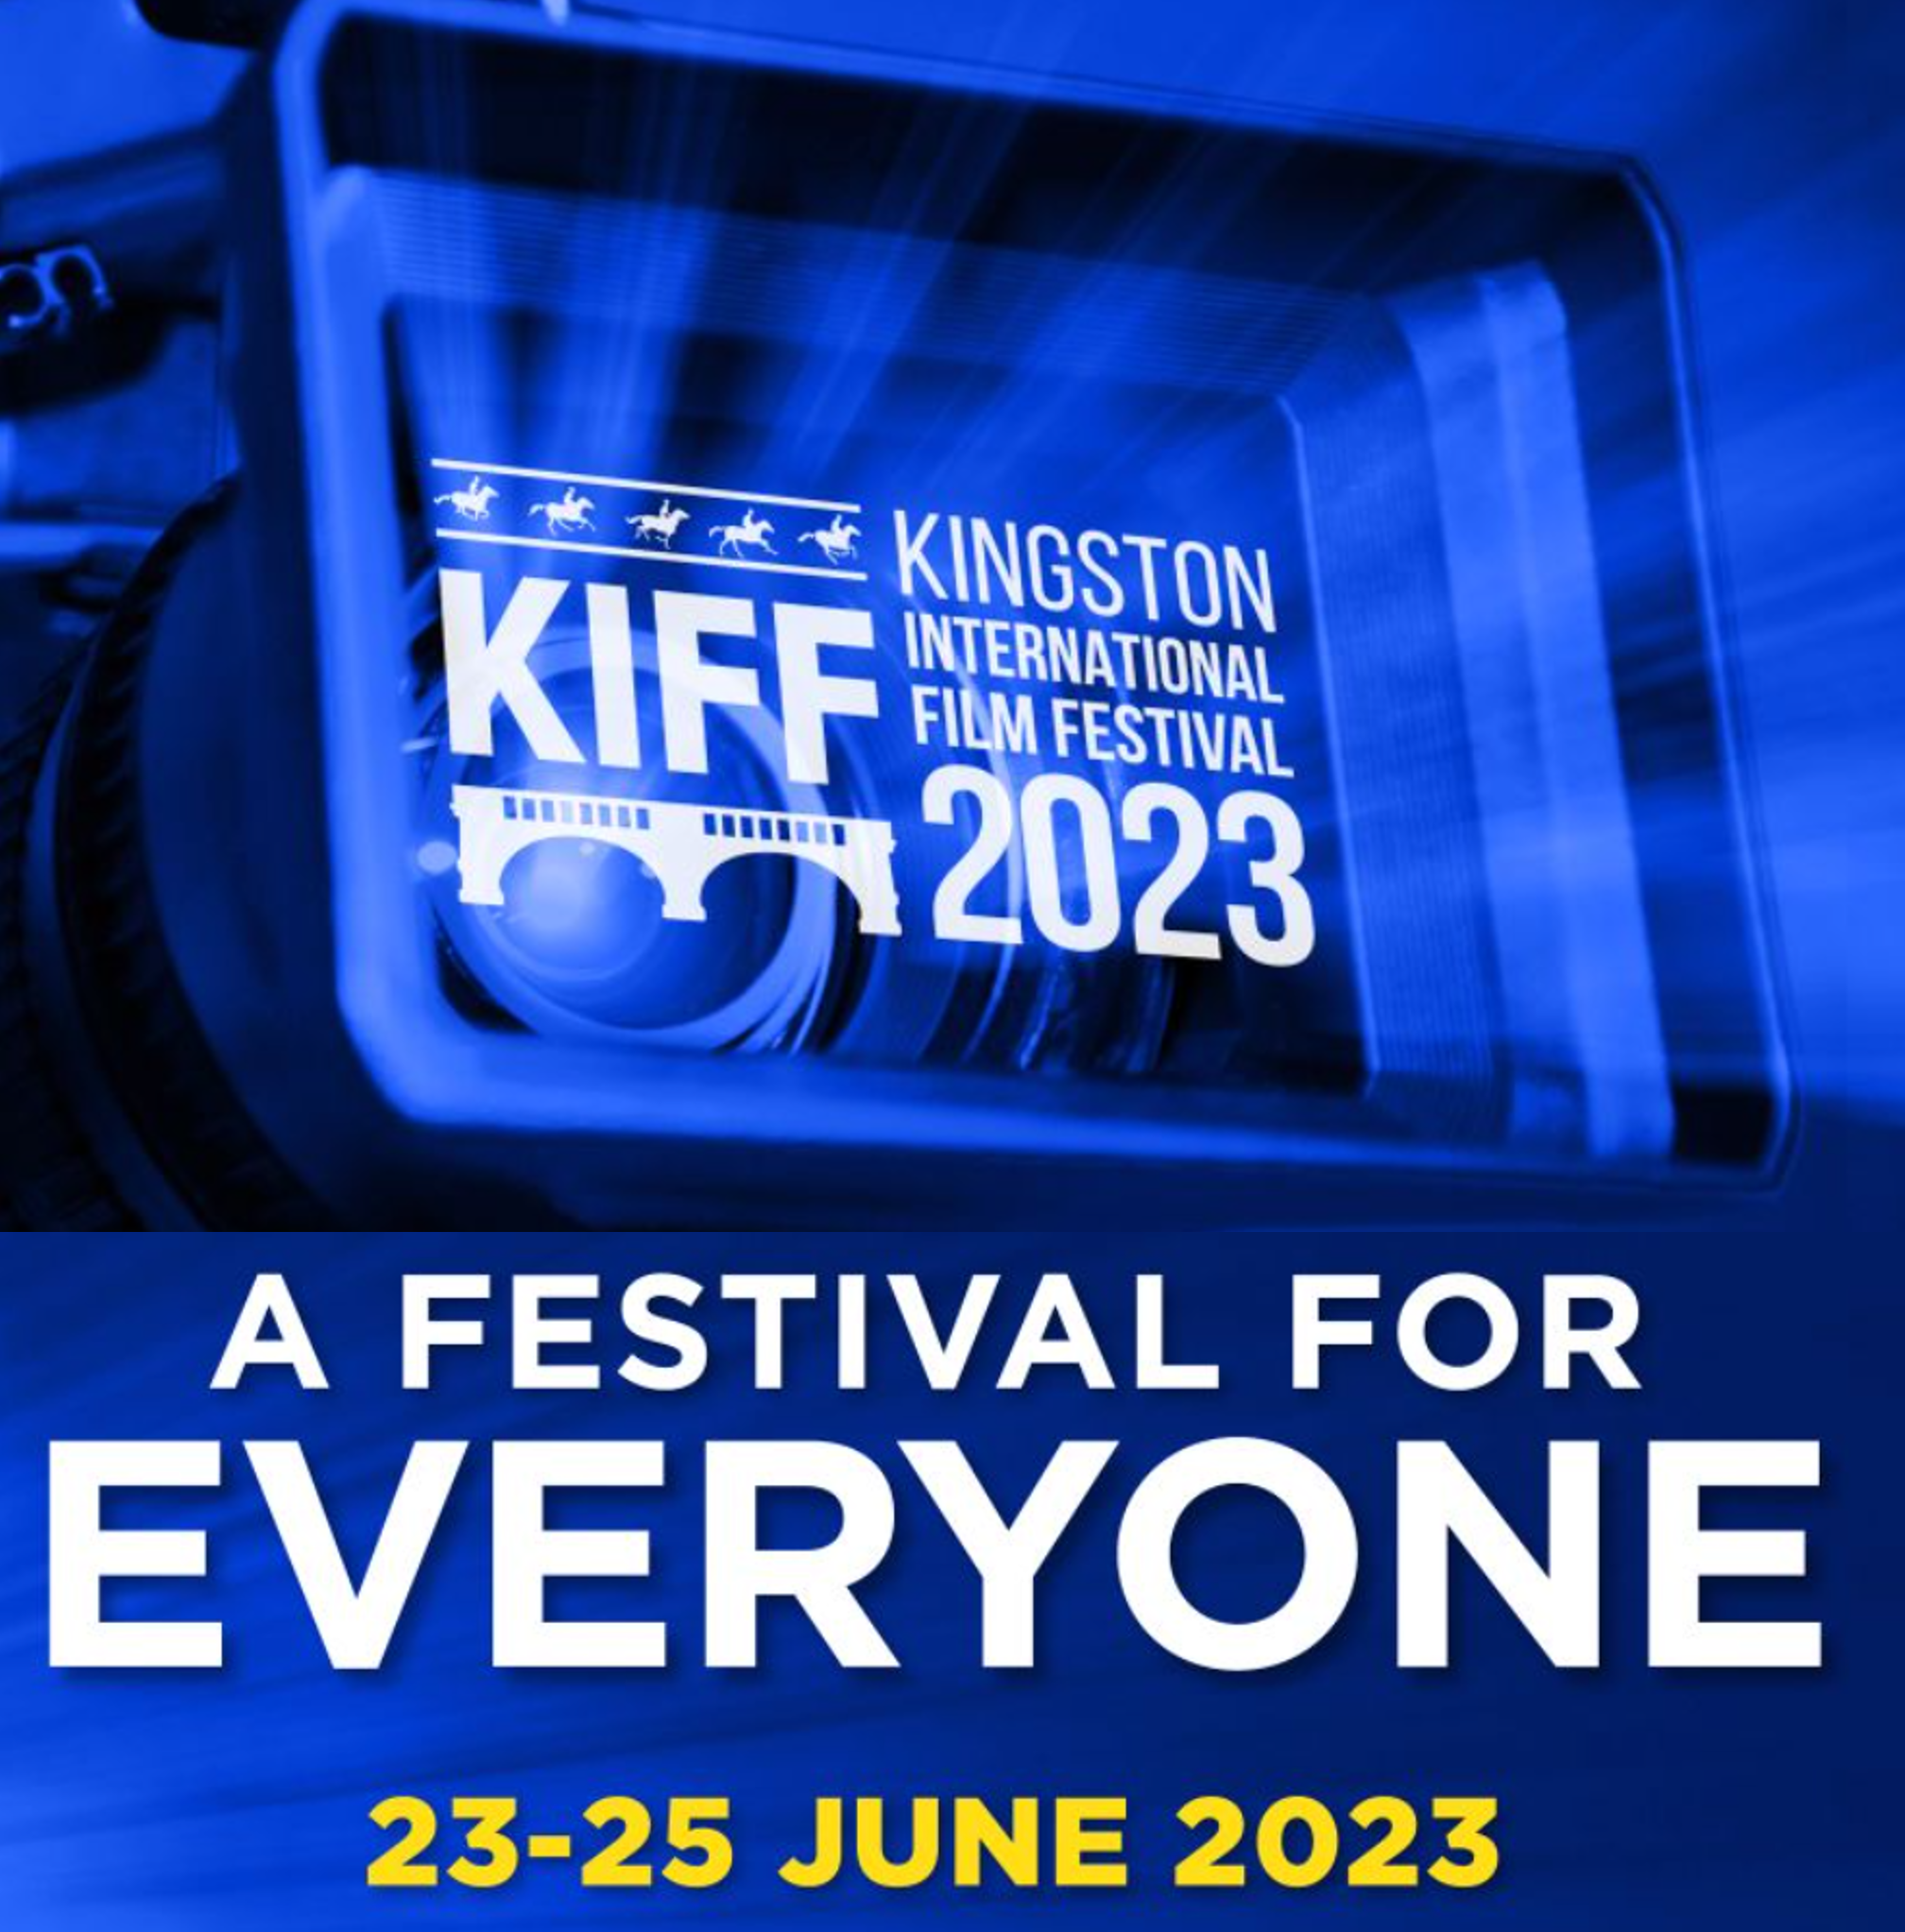 Dark blue picture of a movie camera lens with the KIFF logo in the centre. text - A Festival for Everyone, 23-25 June 2023